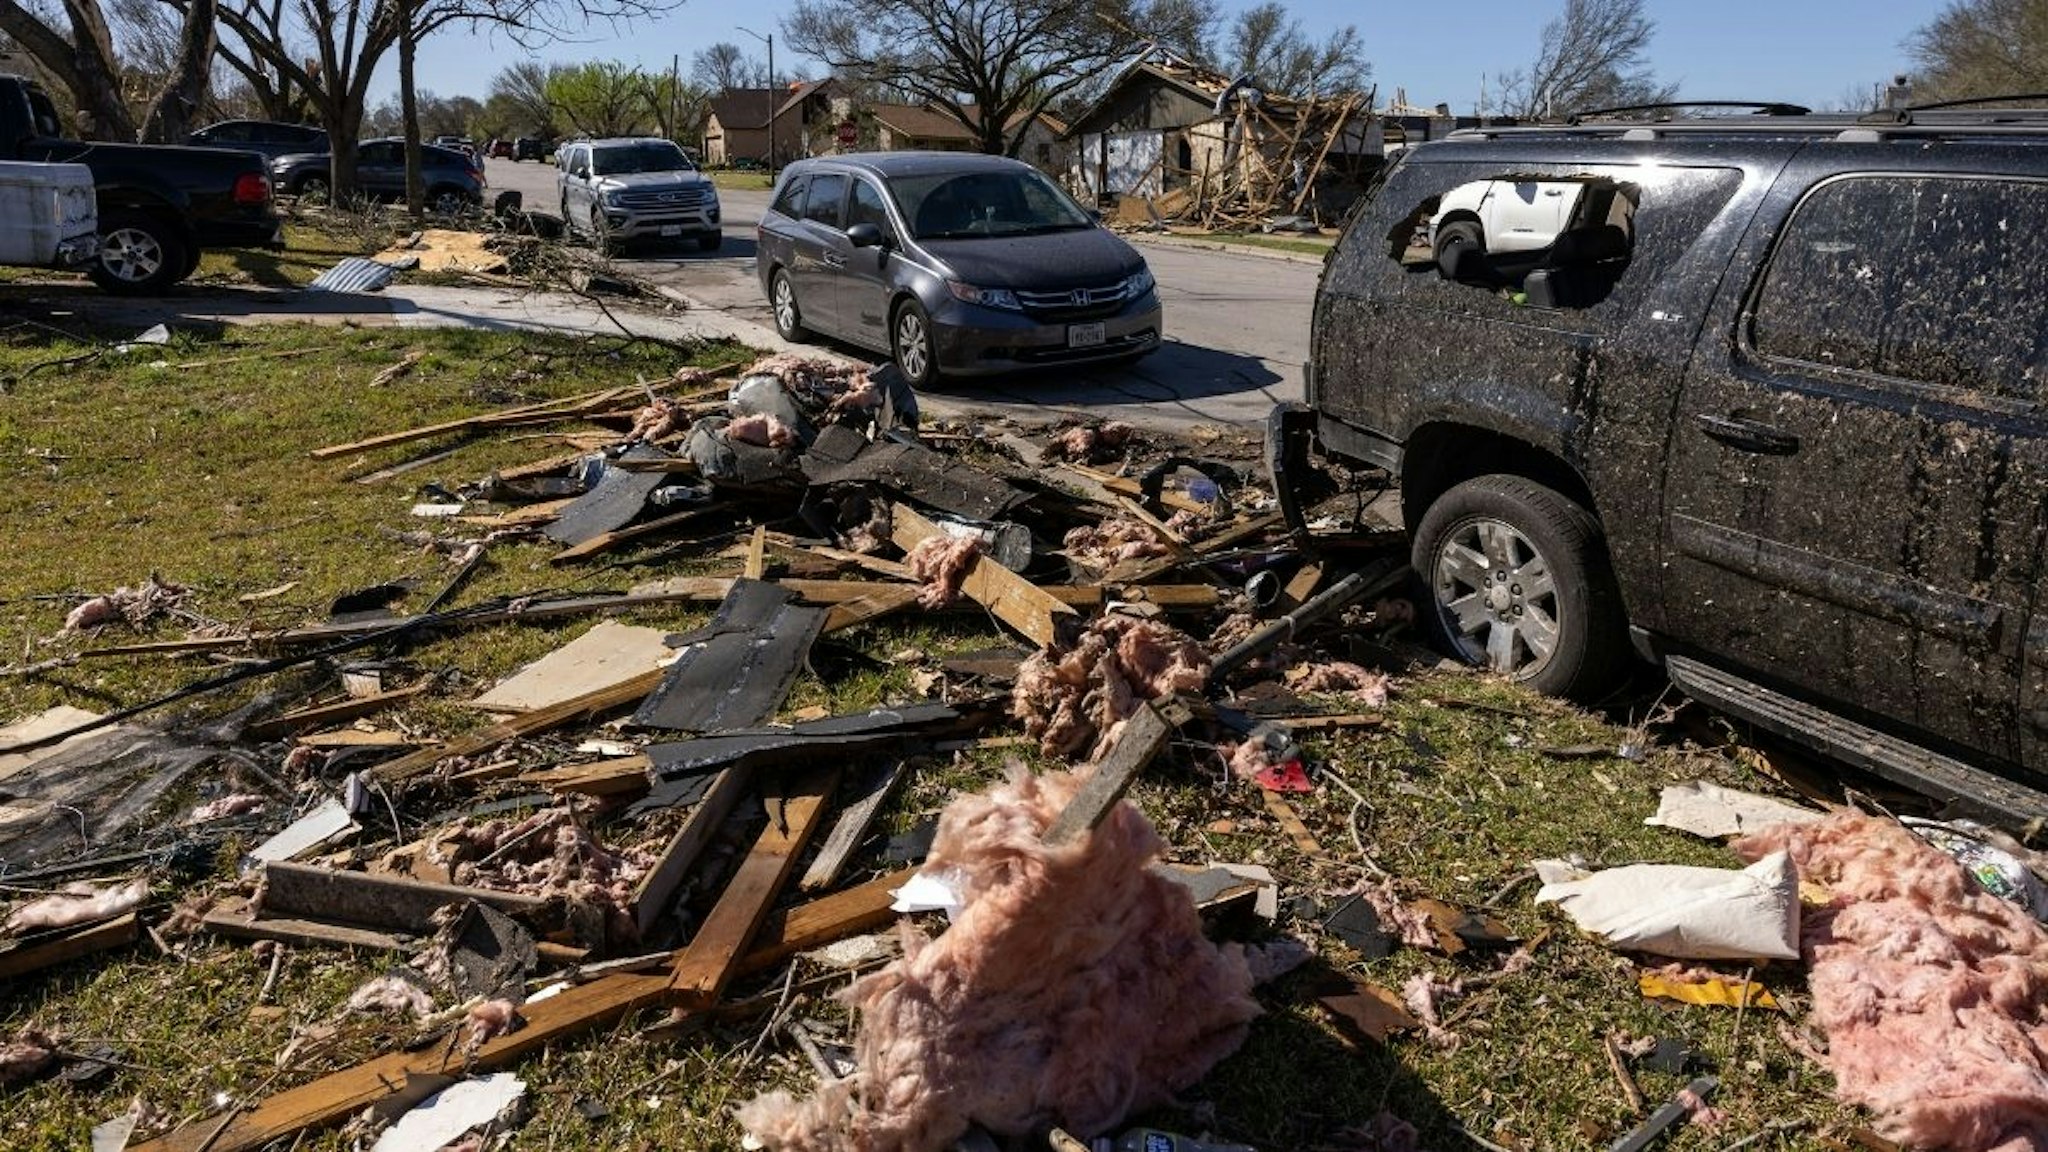 Debris in the front yard of a damaged home following a tornado in Round Rock, Texas, U.S., on Tuesday, March 22, 2022.